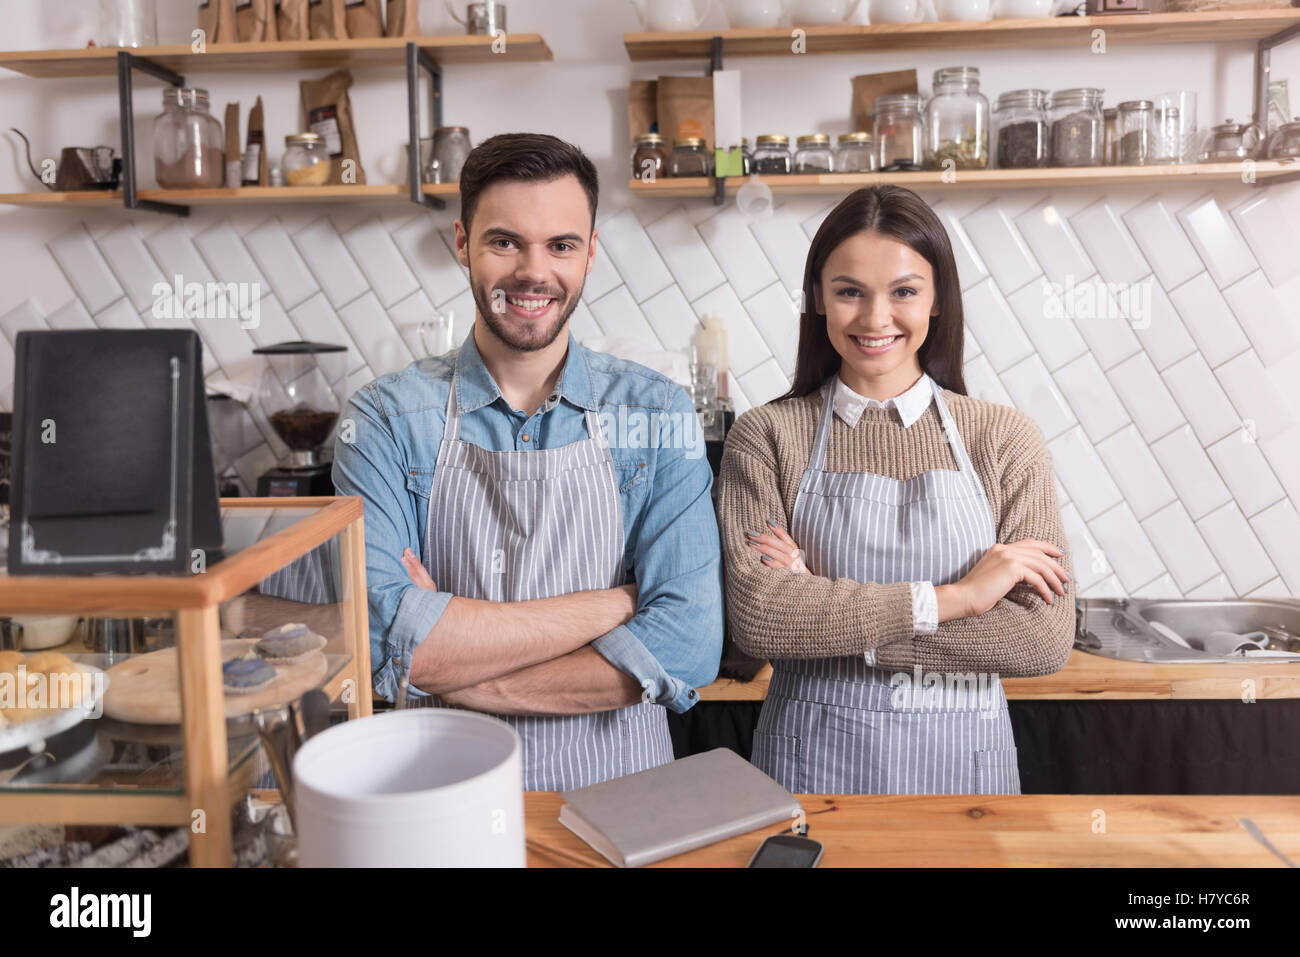 Smiling couple crossing hands while standing behind bar. Stock Photo